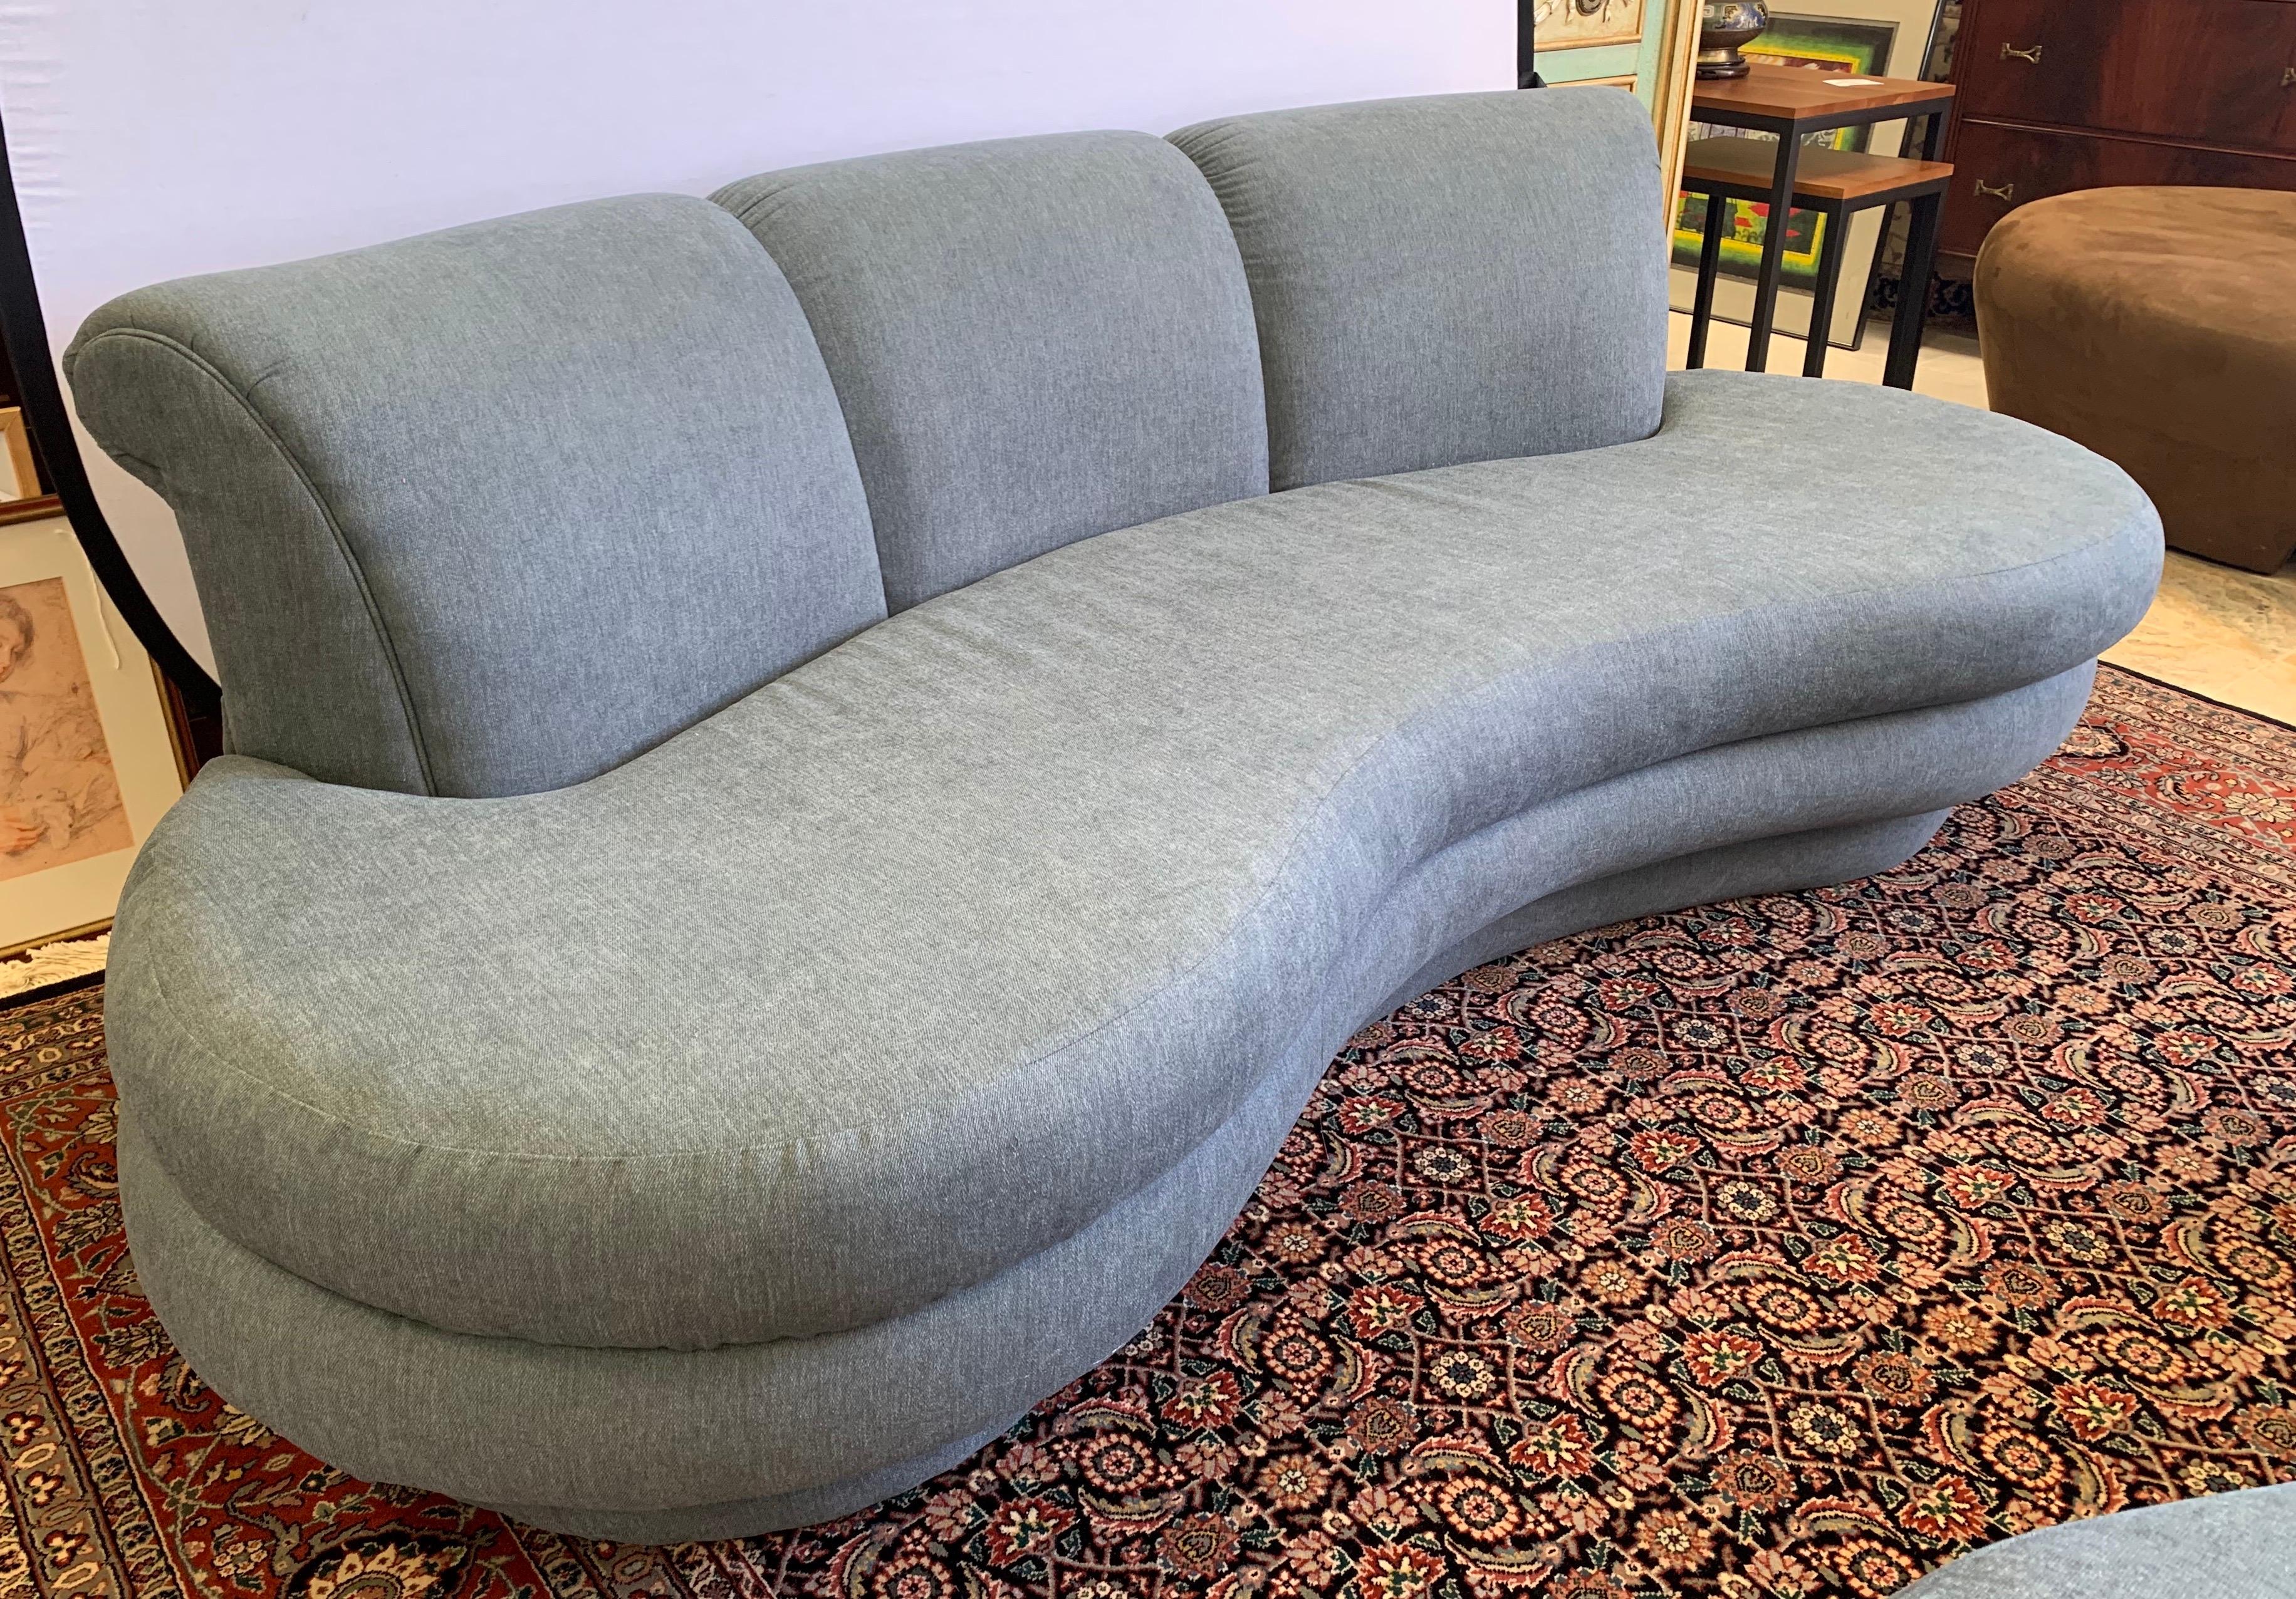 Late 20th Century Matching Pearsall Comfort Design Cloud Sofas New Upholstered in Slate Gray, Pair